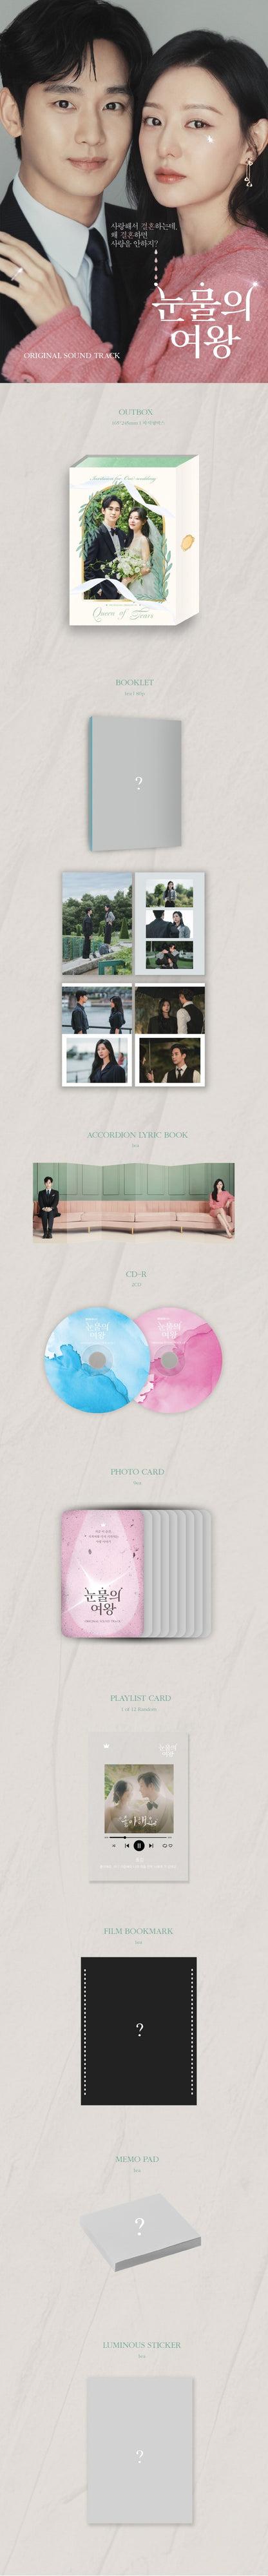 [PREORDER] QUEEN OF TEARS O.S.T - TVN DRAMA (2CD)